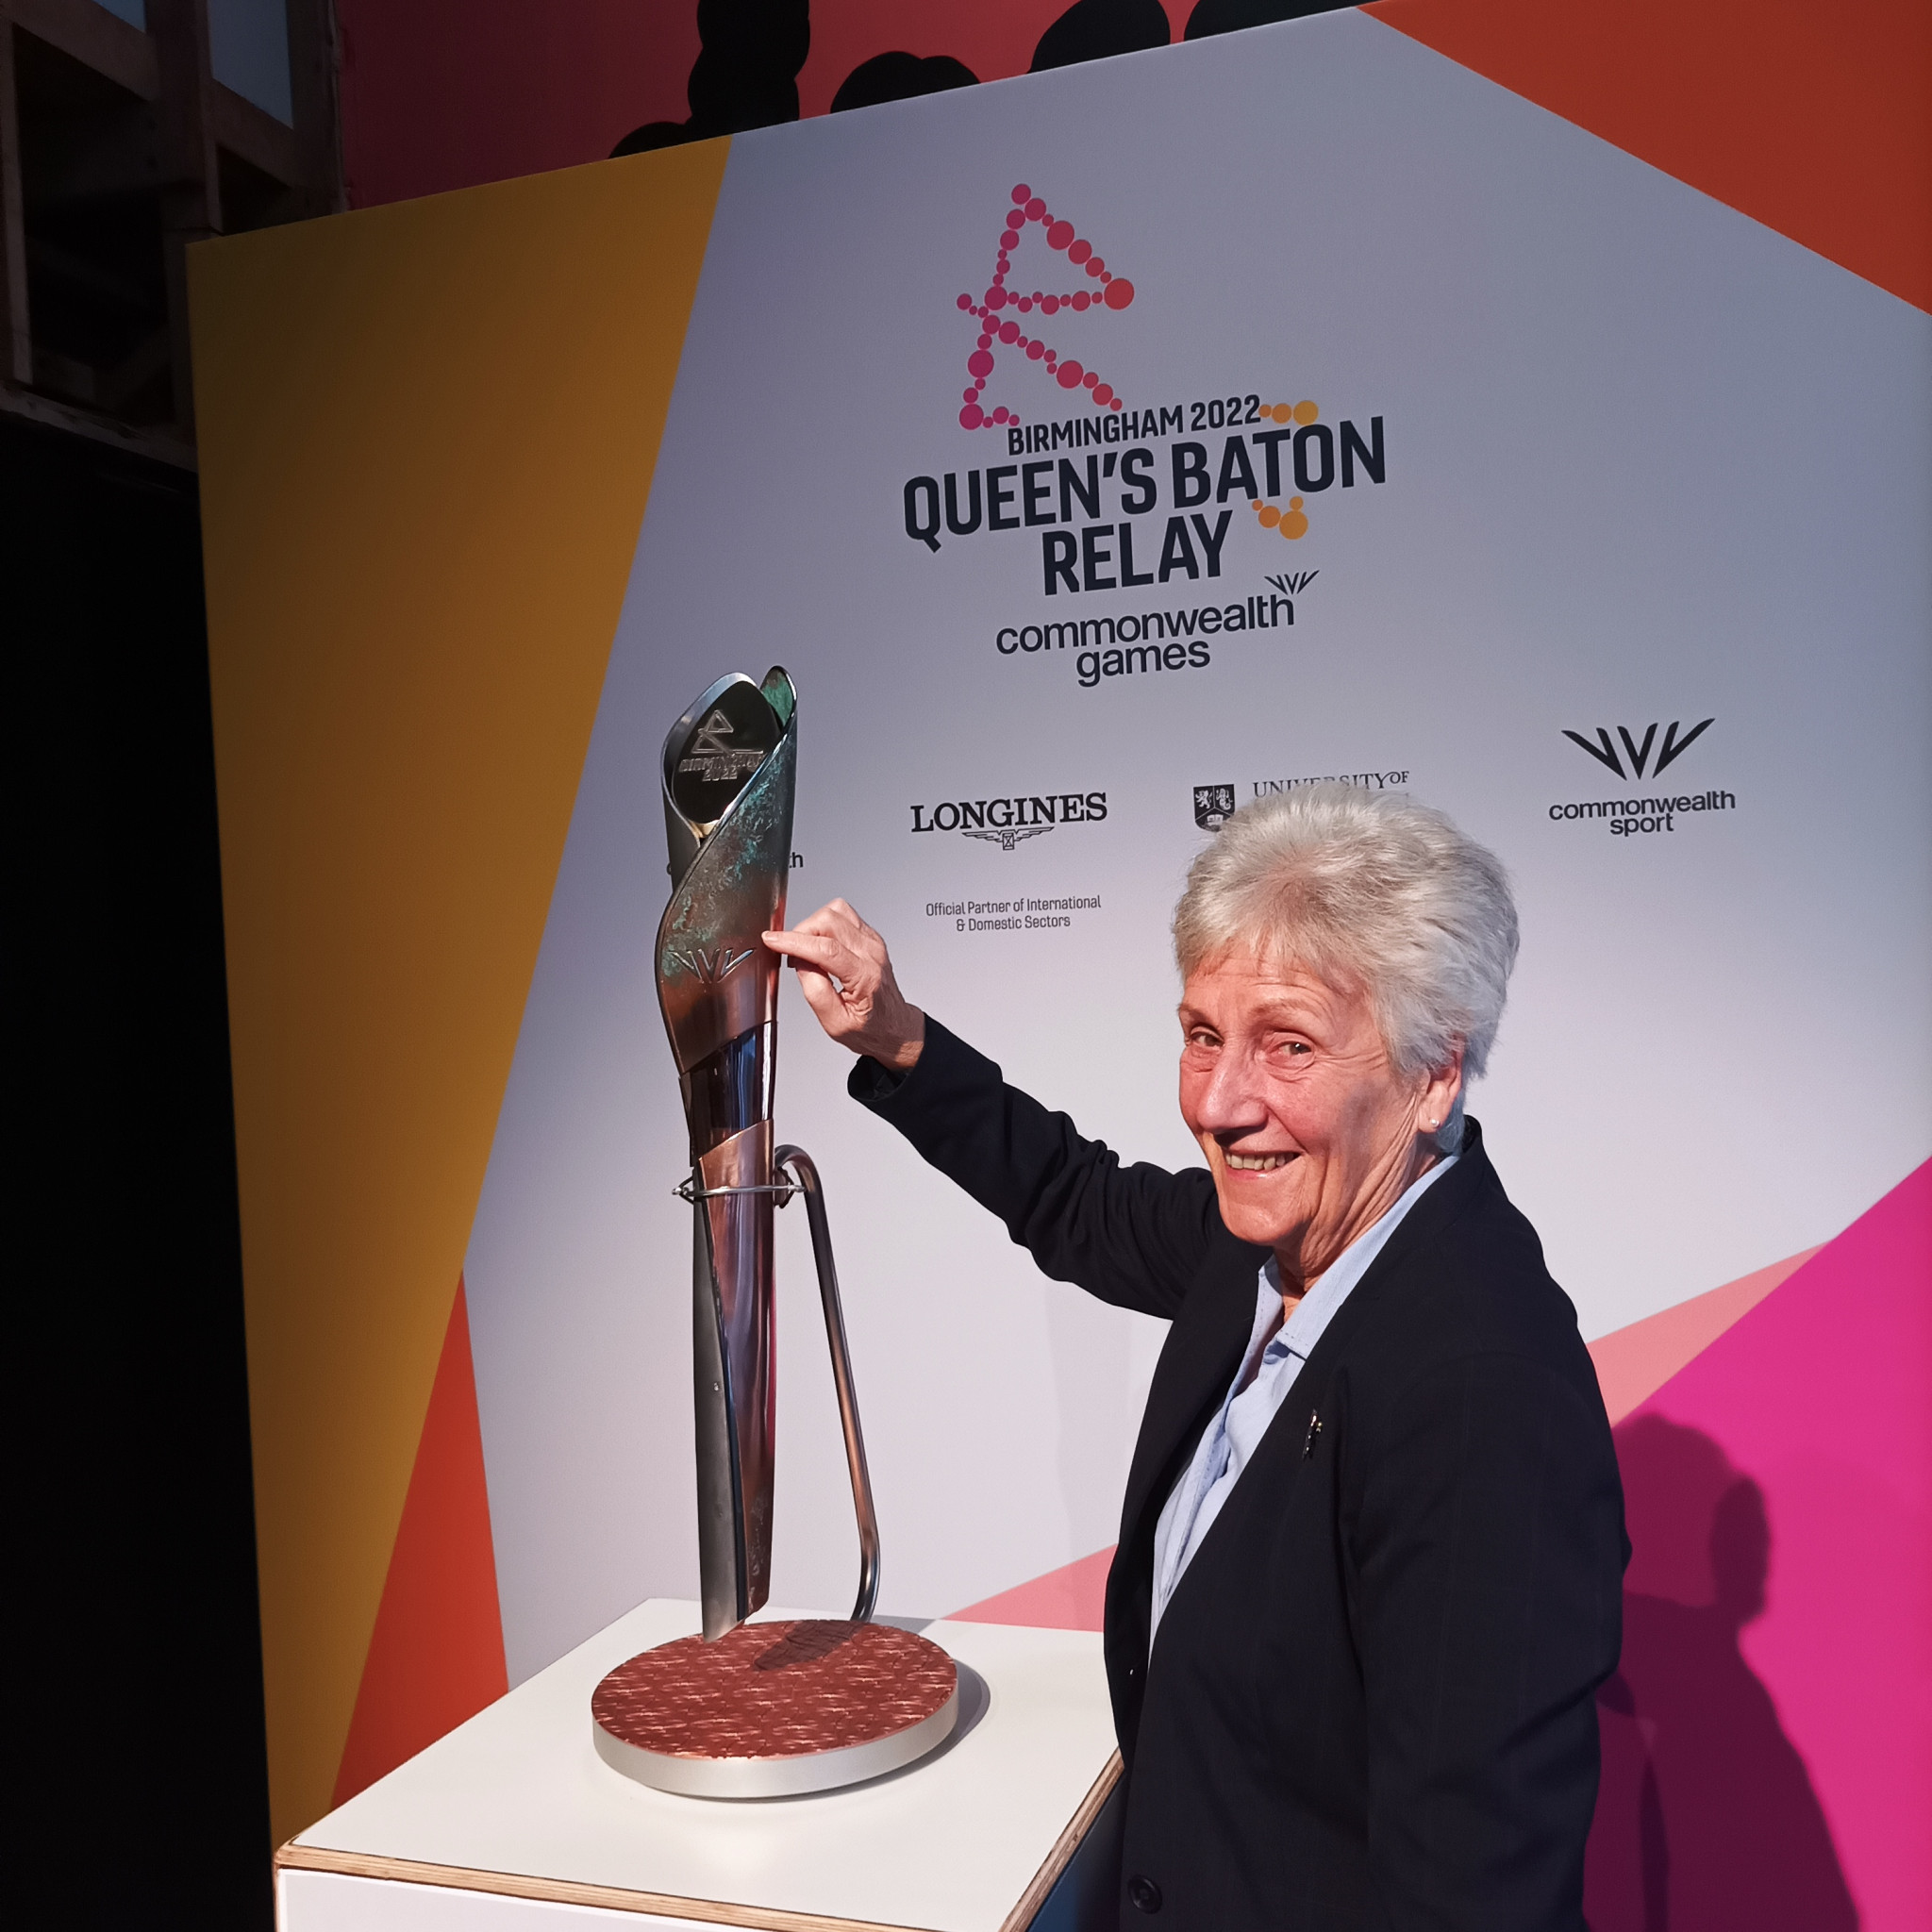 The Birmingham 2022 Baton - seen here being inspected by Commonwealth Games Federation President Dame Louise Martin - has been unveiled ©Philip Barker